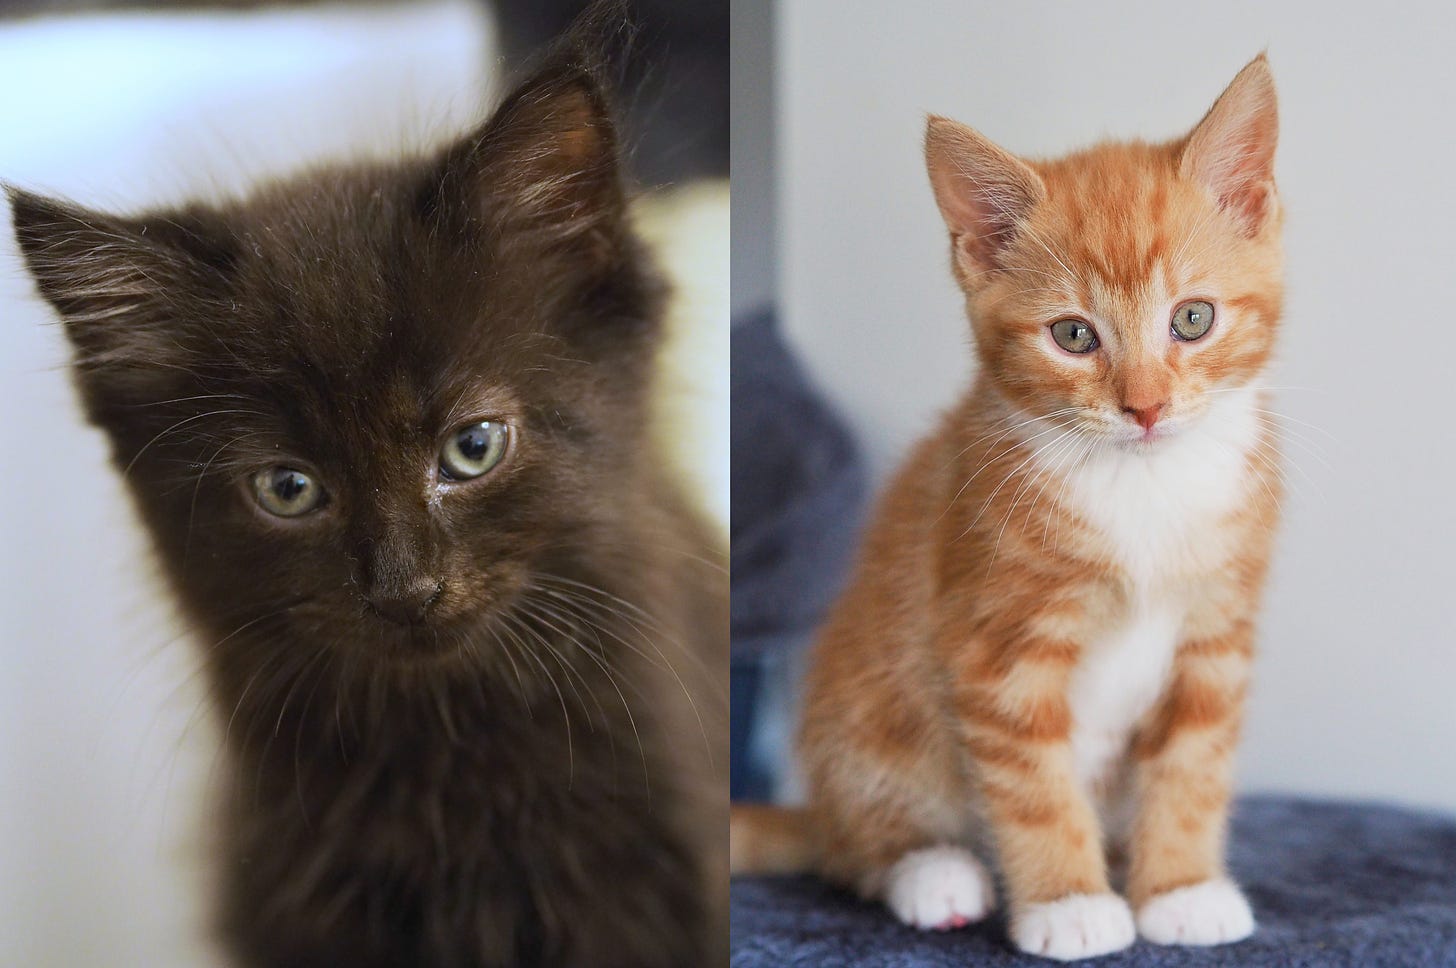 two cute kittens. On the left a black long haired one and on the right a ginger one